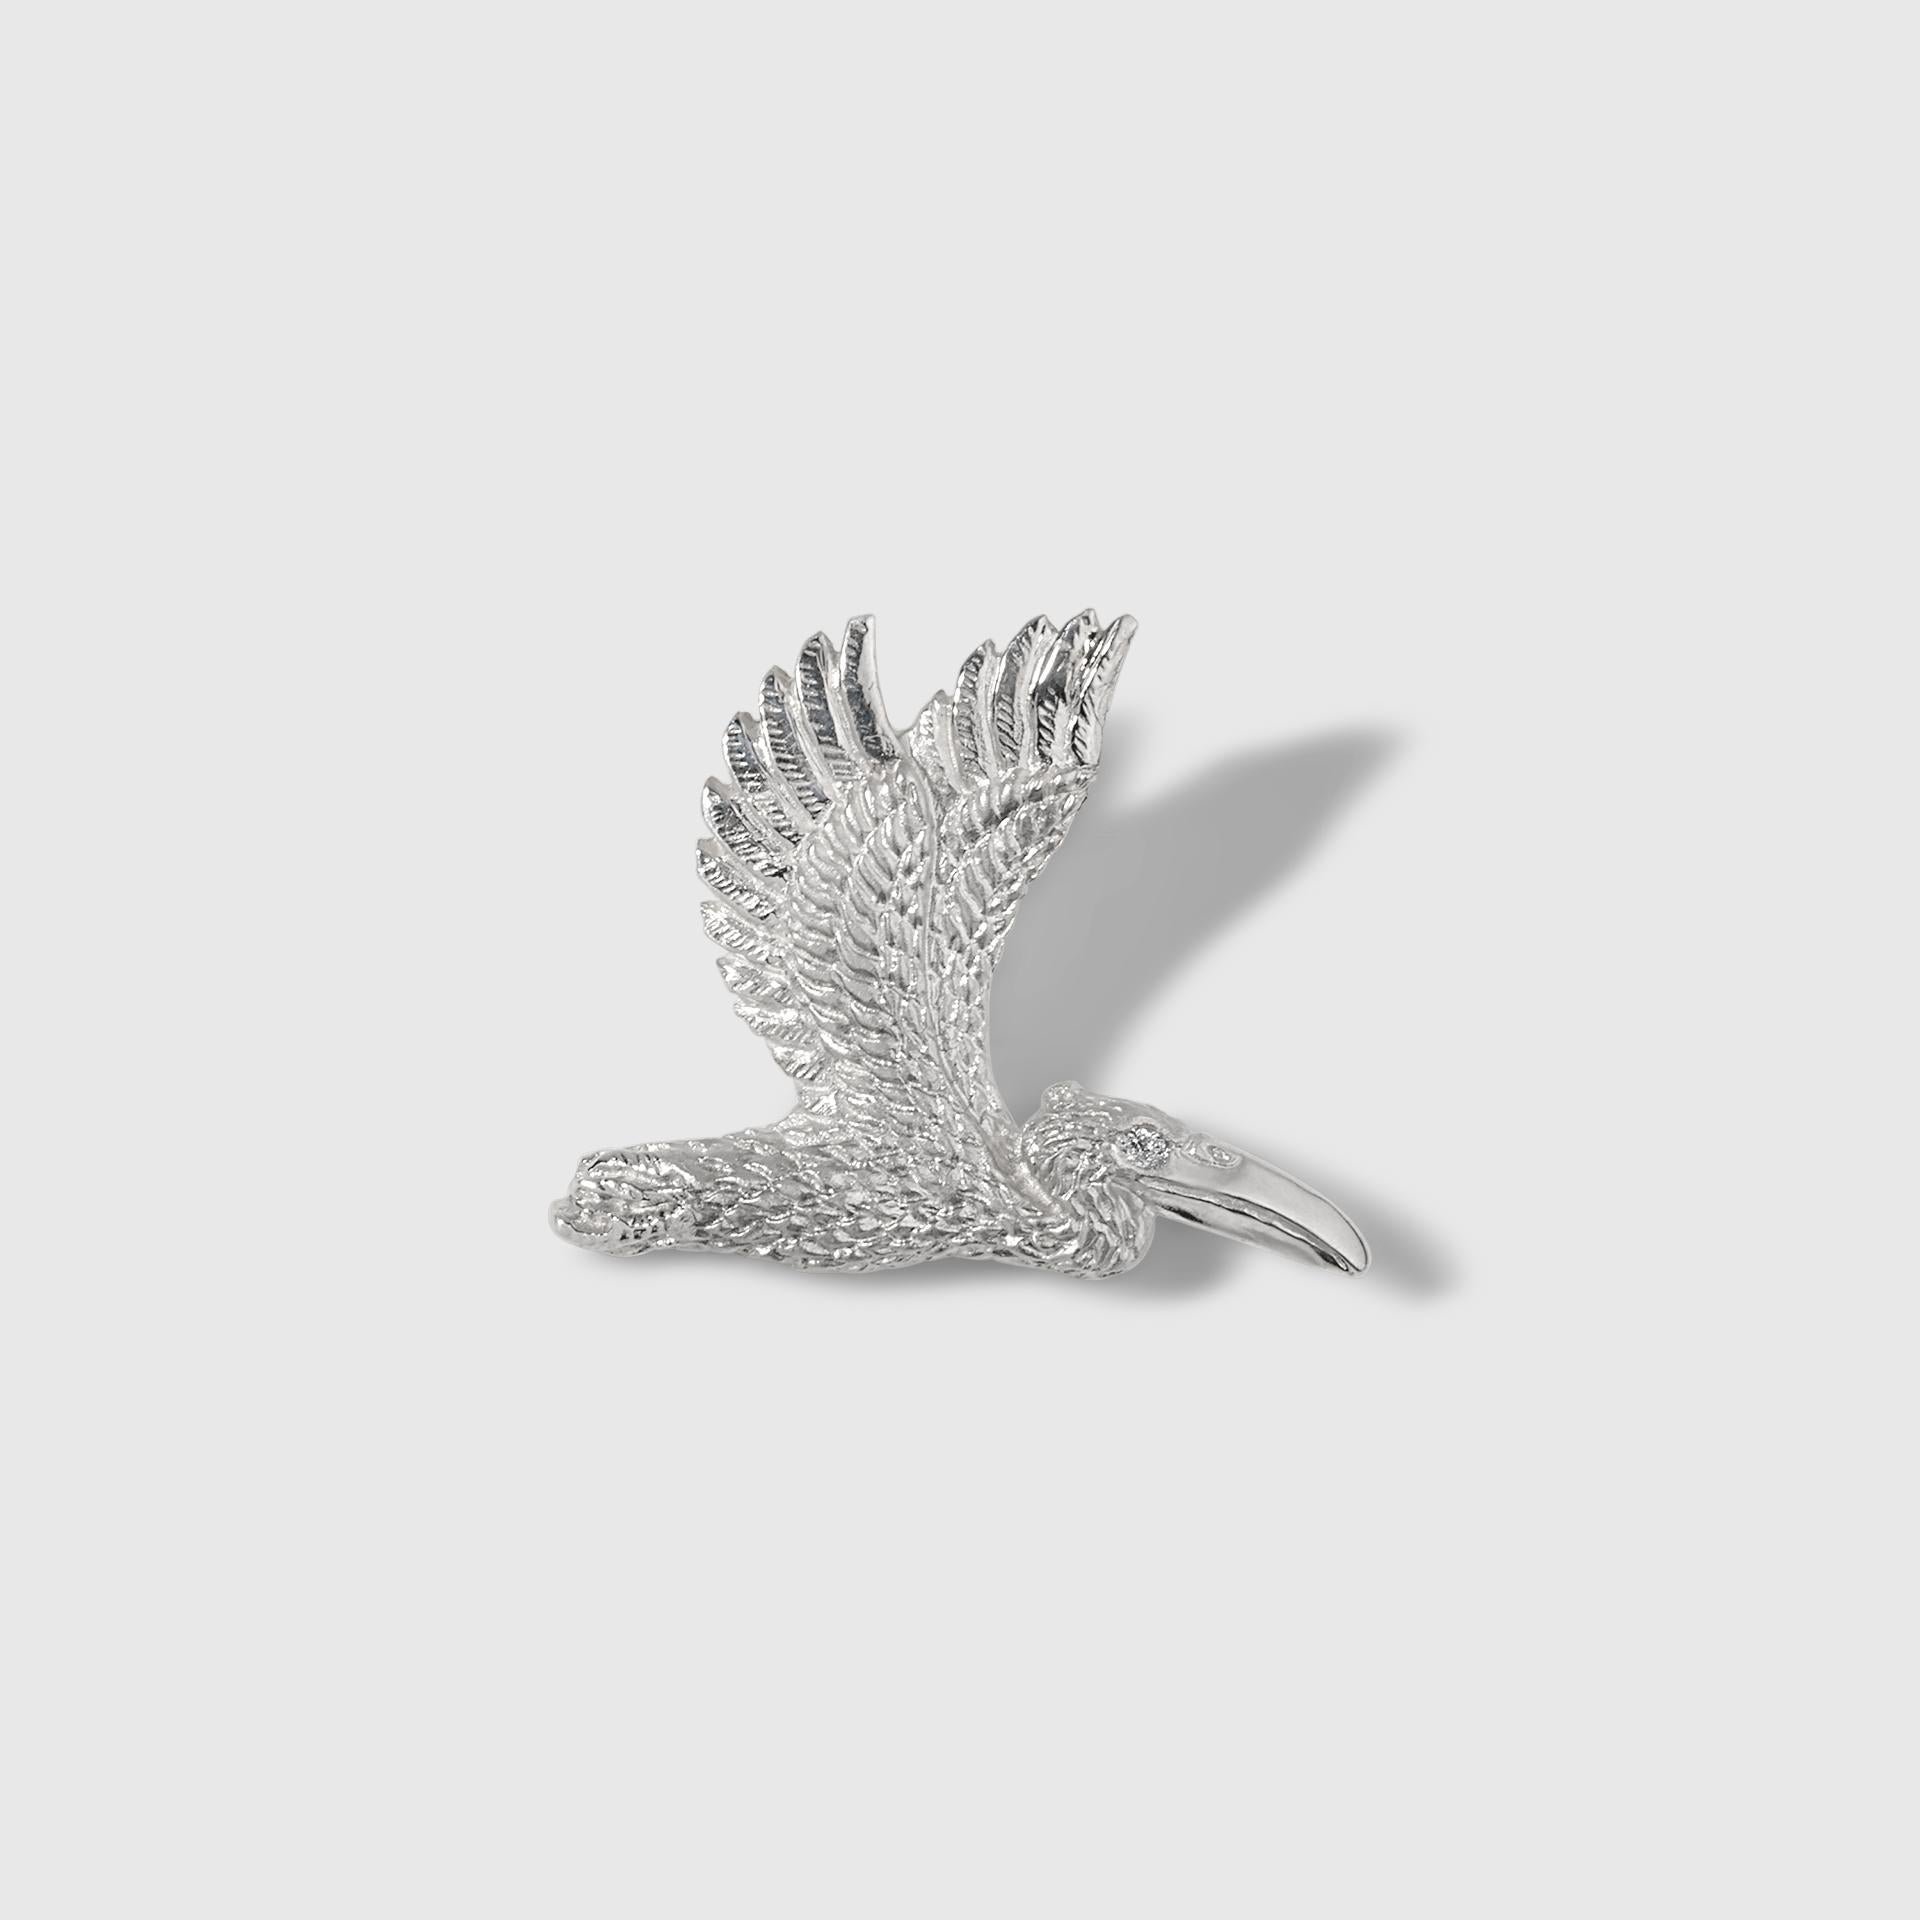 Detailed Sterling Silver Pelican Brooch Pin with Diamond Eye by Ashley Childs

Pelican originally carved by 